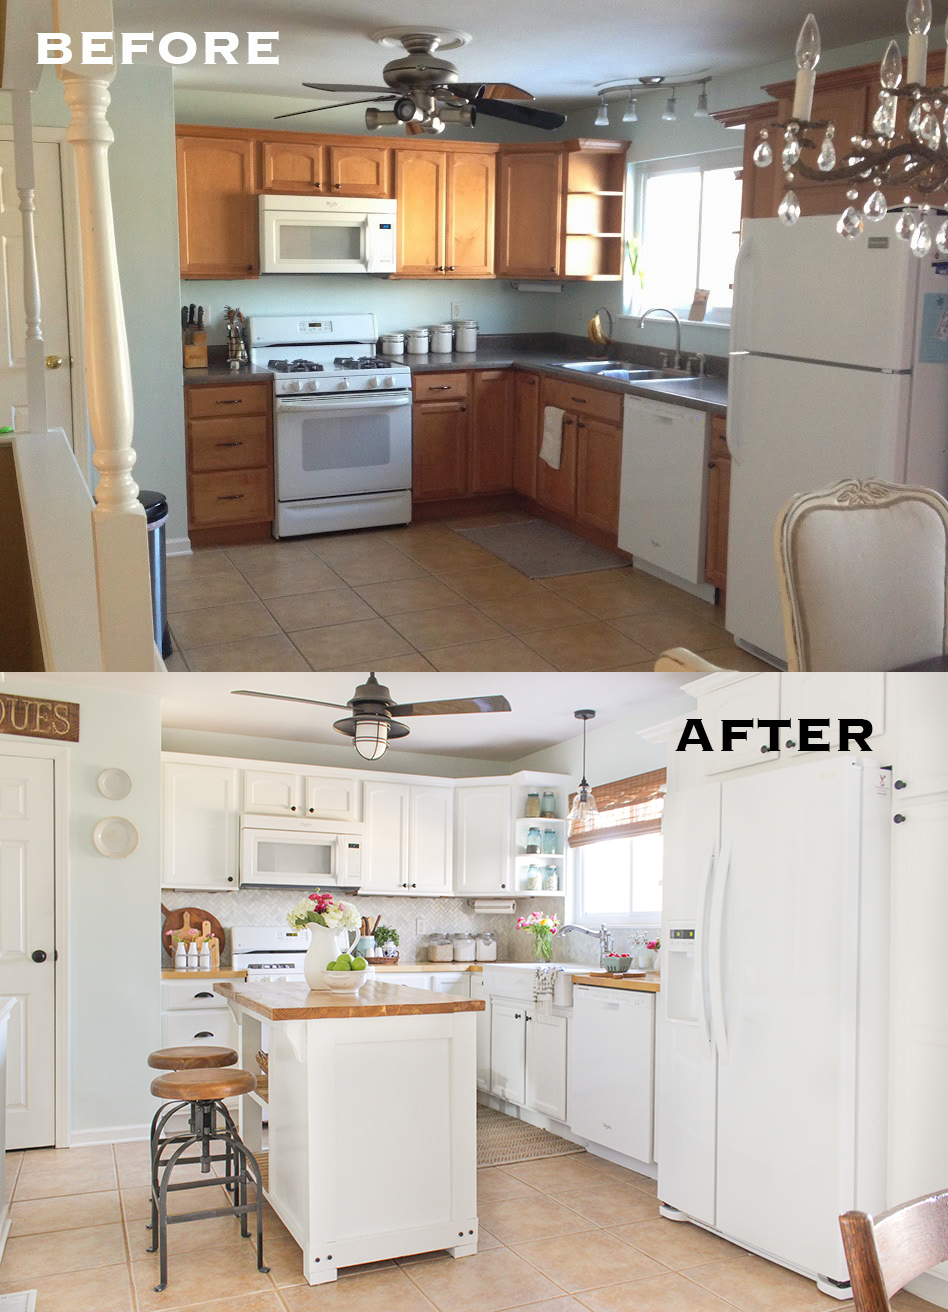 kitchen before after remodel small farmhouse makeovers budget makeover renovations renovation diy reveal kitchens style pretty interiors shadesofblueinteriors remodeling painted